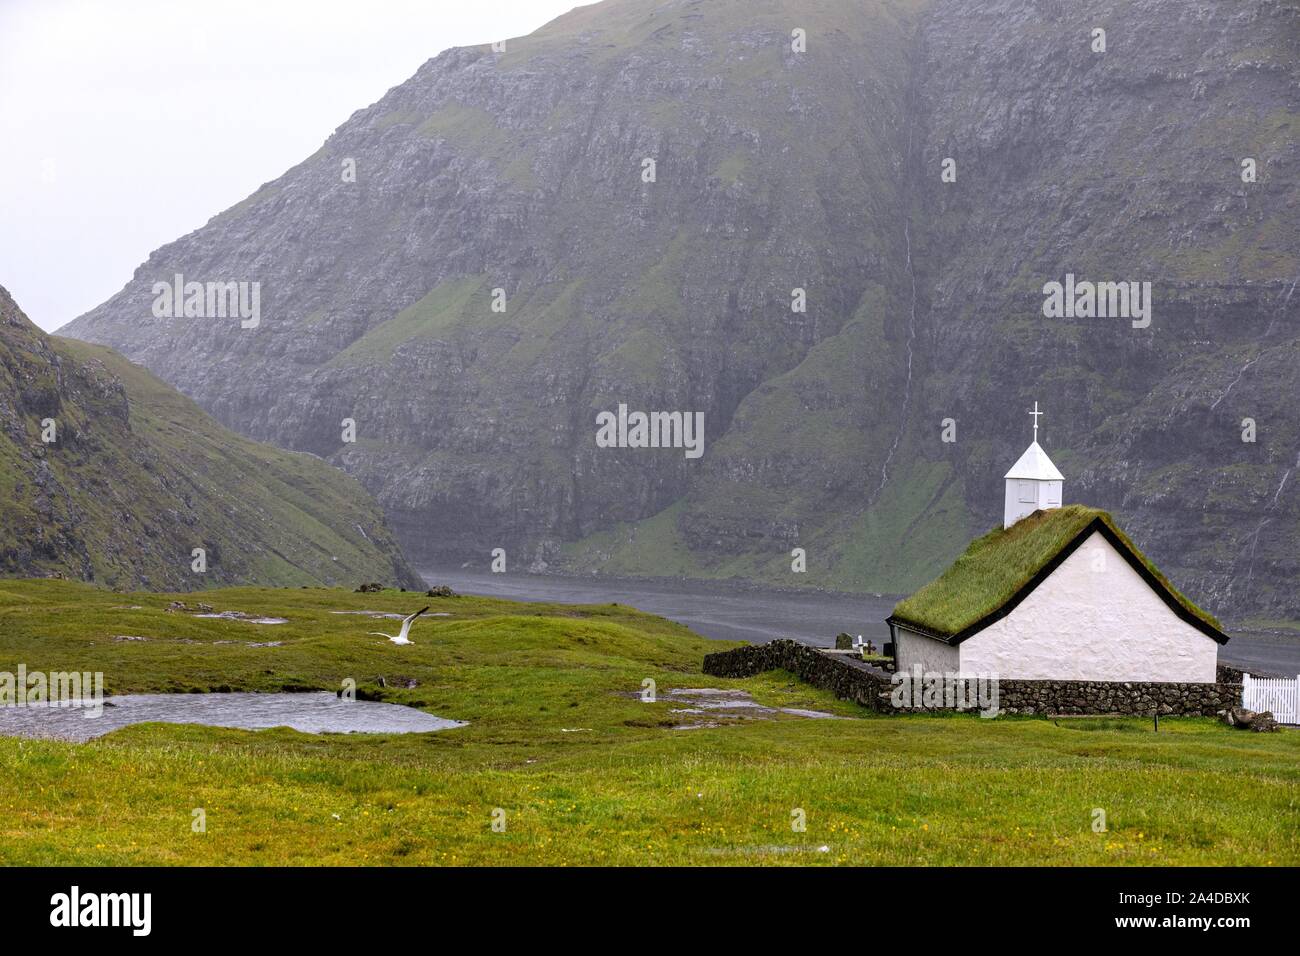 CHURCH WITH ITS VEGETAL ROOF COVERED IN GREEN GRASS, VILLAGE OF SAKSUN, FAROE ISLANDS, DENMARK, EUROPE Stock Photo